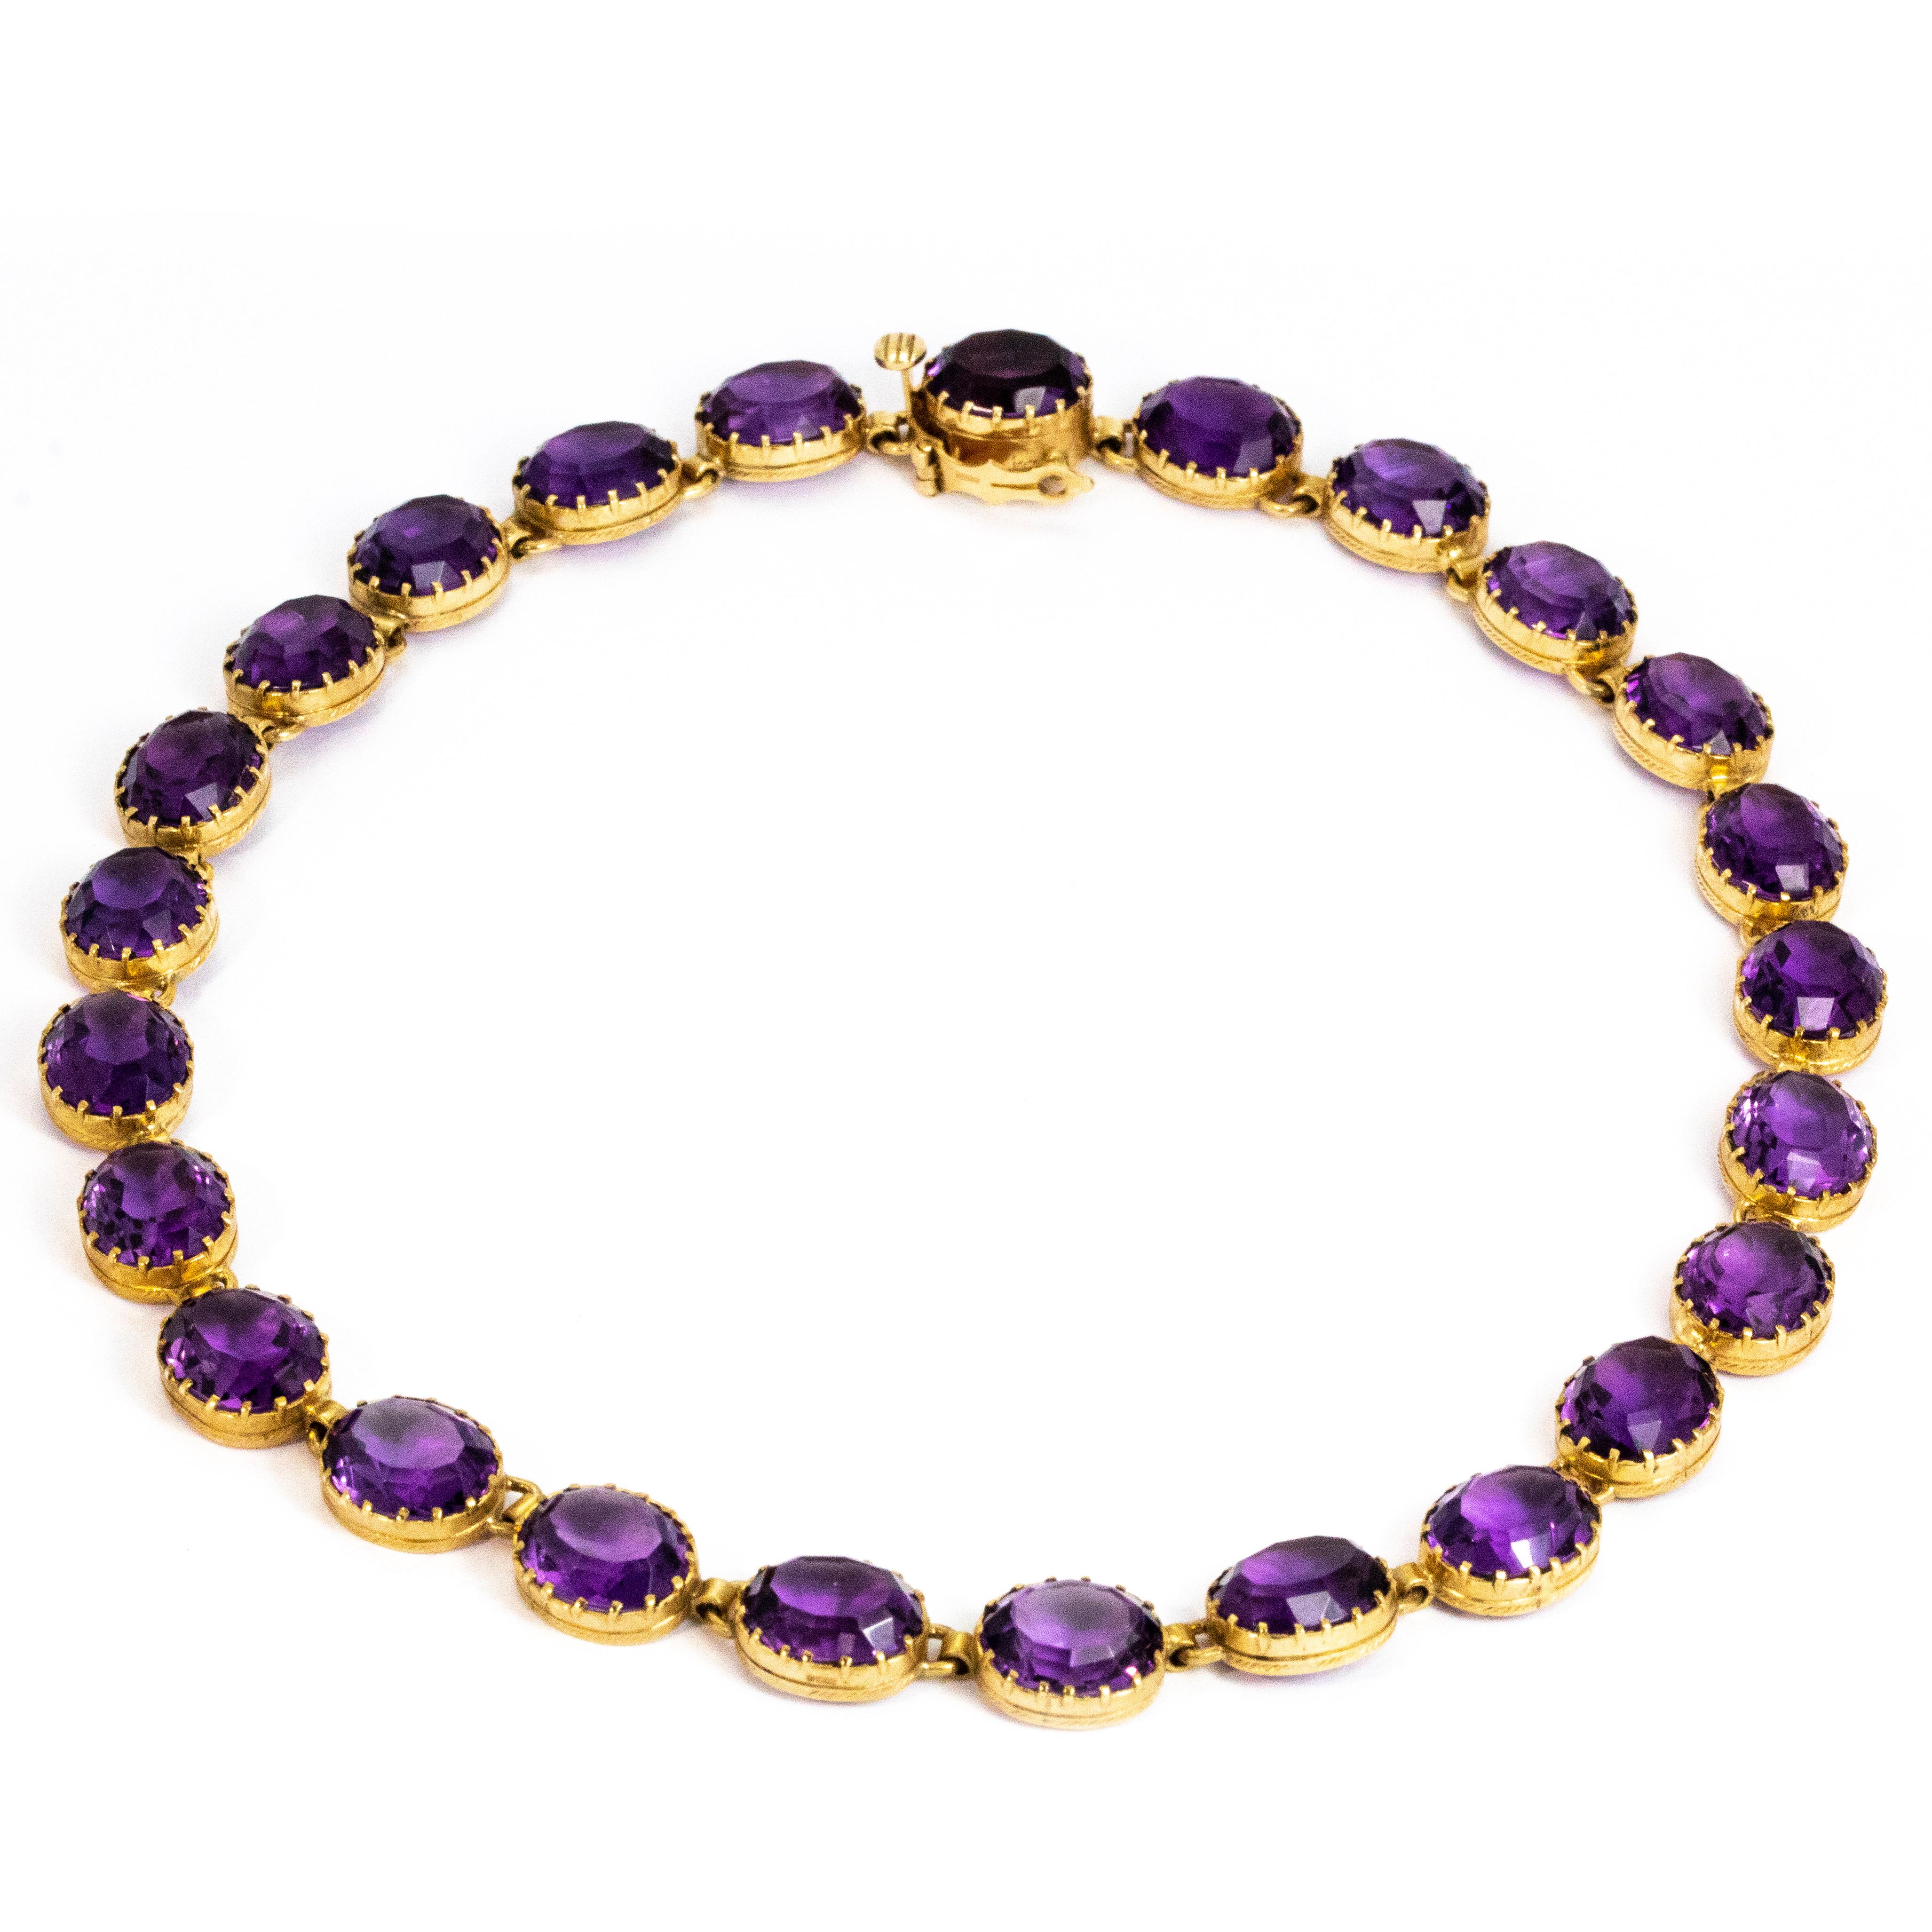 An exquisite vintage rivière necklace comprised of 25 sublime oval amethysts in wonderful deep pie crust claw settings. Modelled in 9 carat yellow gold. 

Necklace Length: 38.5 cm